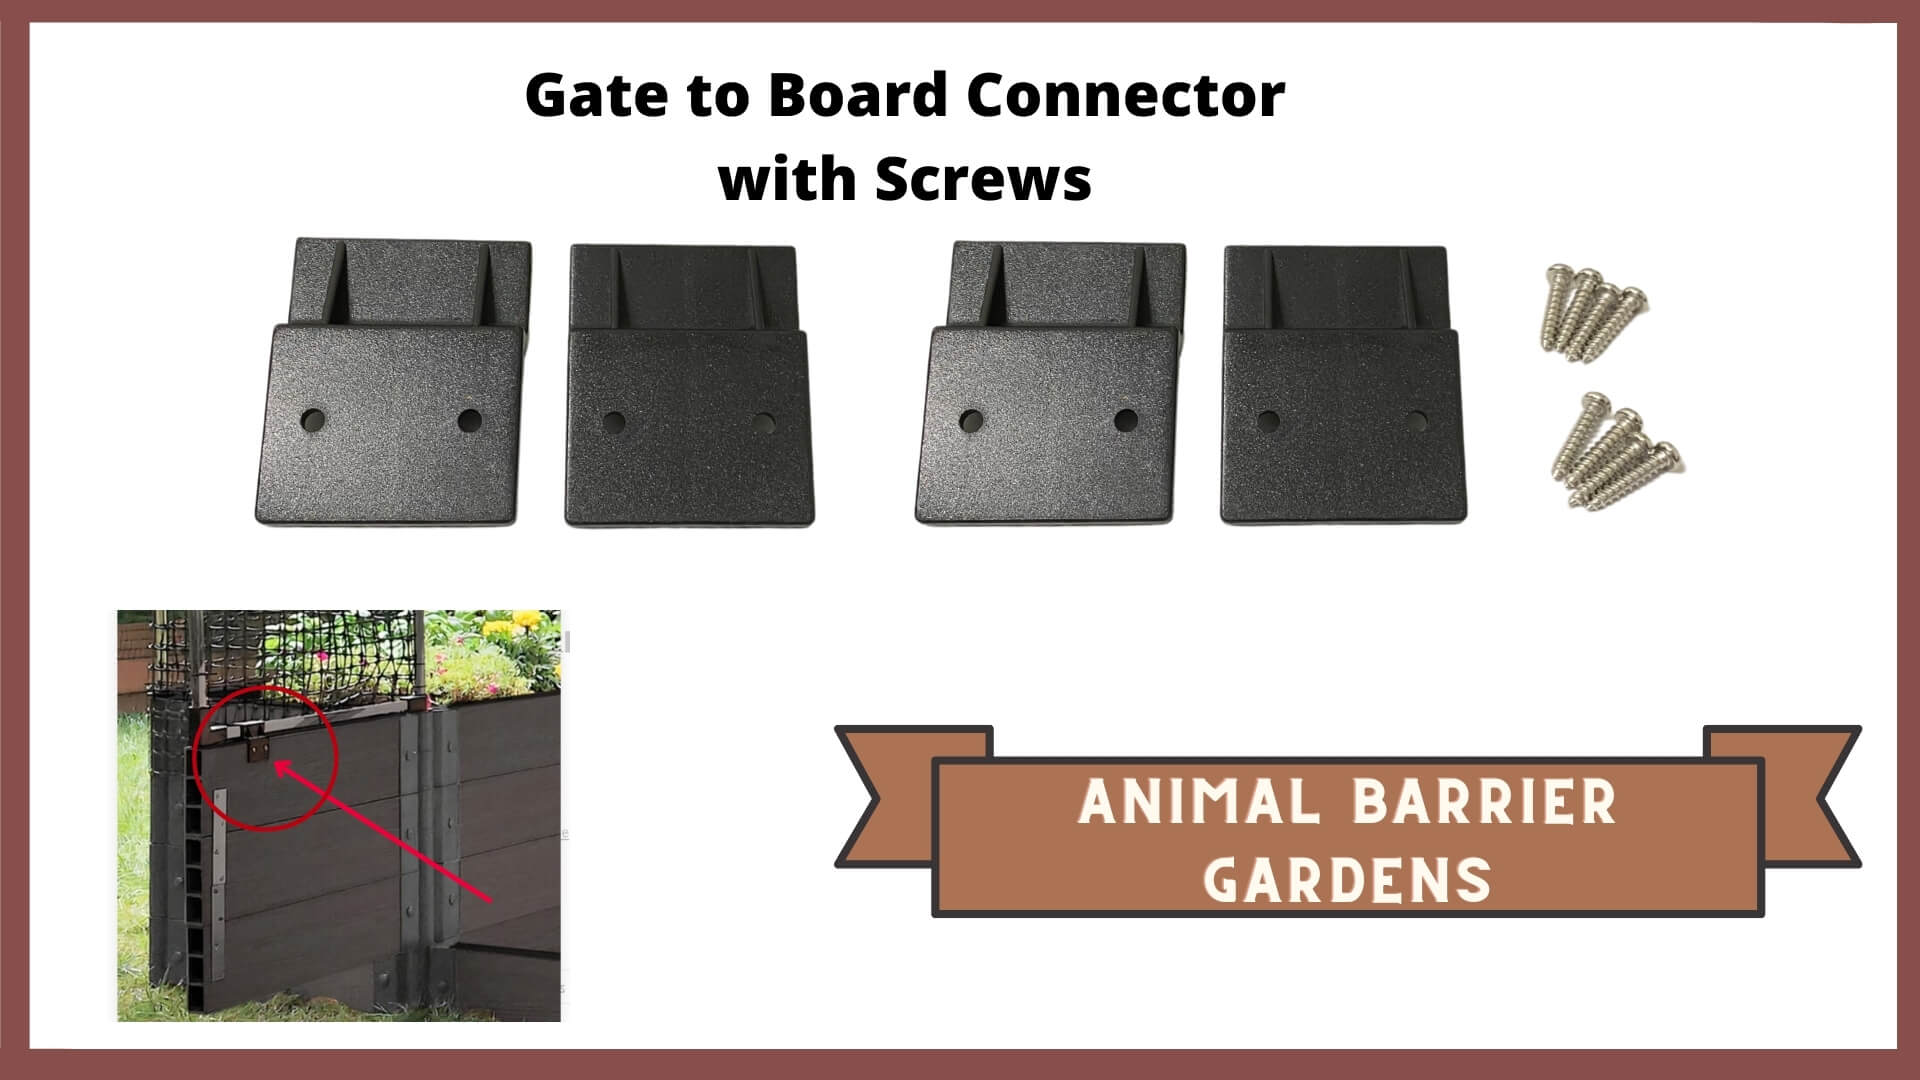 REPLACEMENT PARTS for: Stack & Extend Animal Barrier Kits & Gardens Accessories Frame It All Gate to Board Connector with Screws 